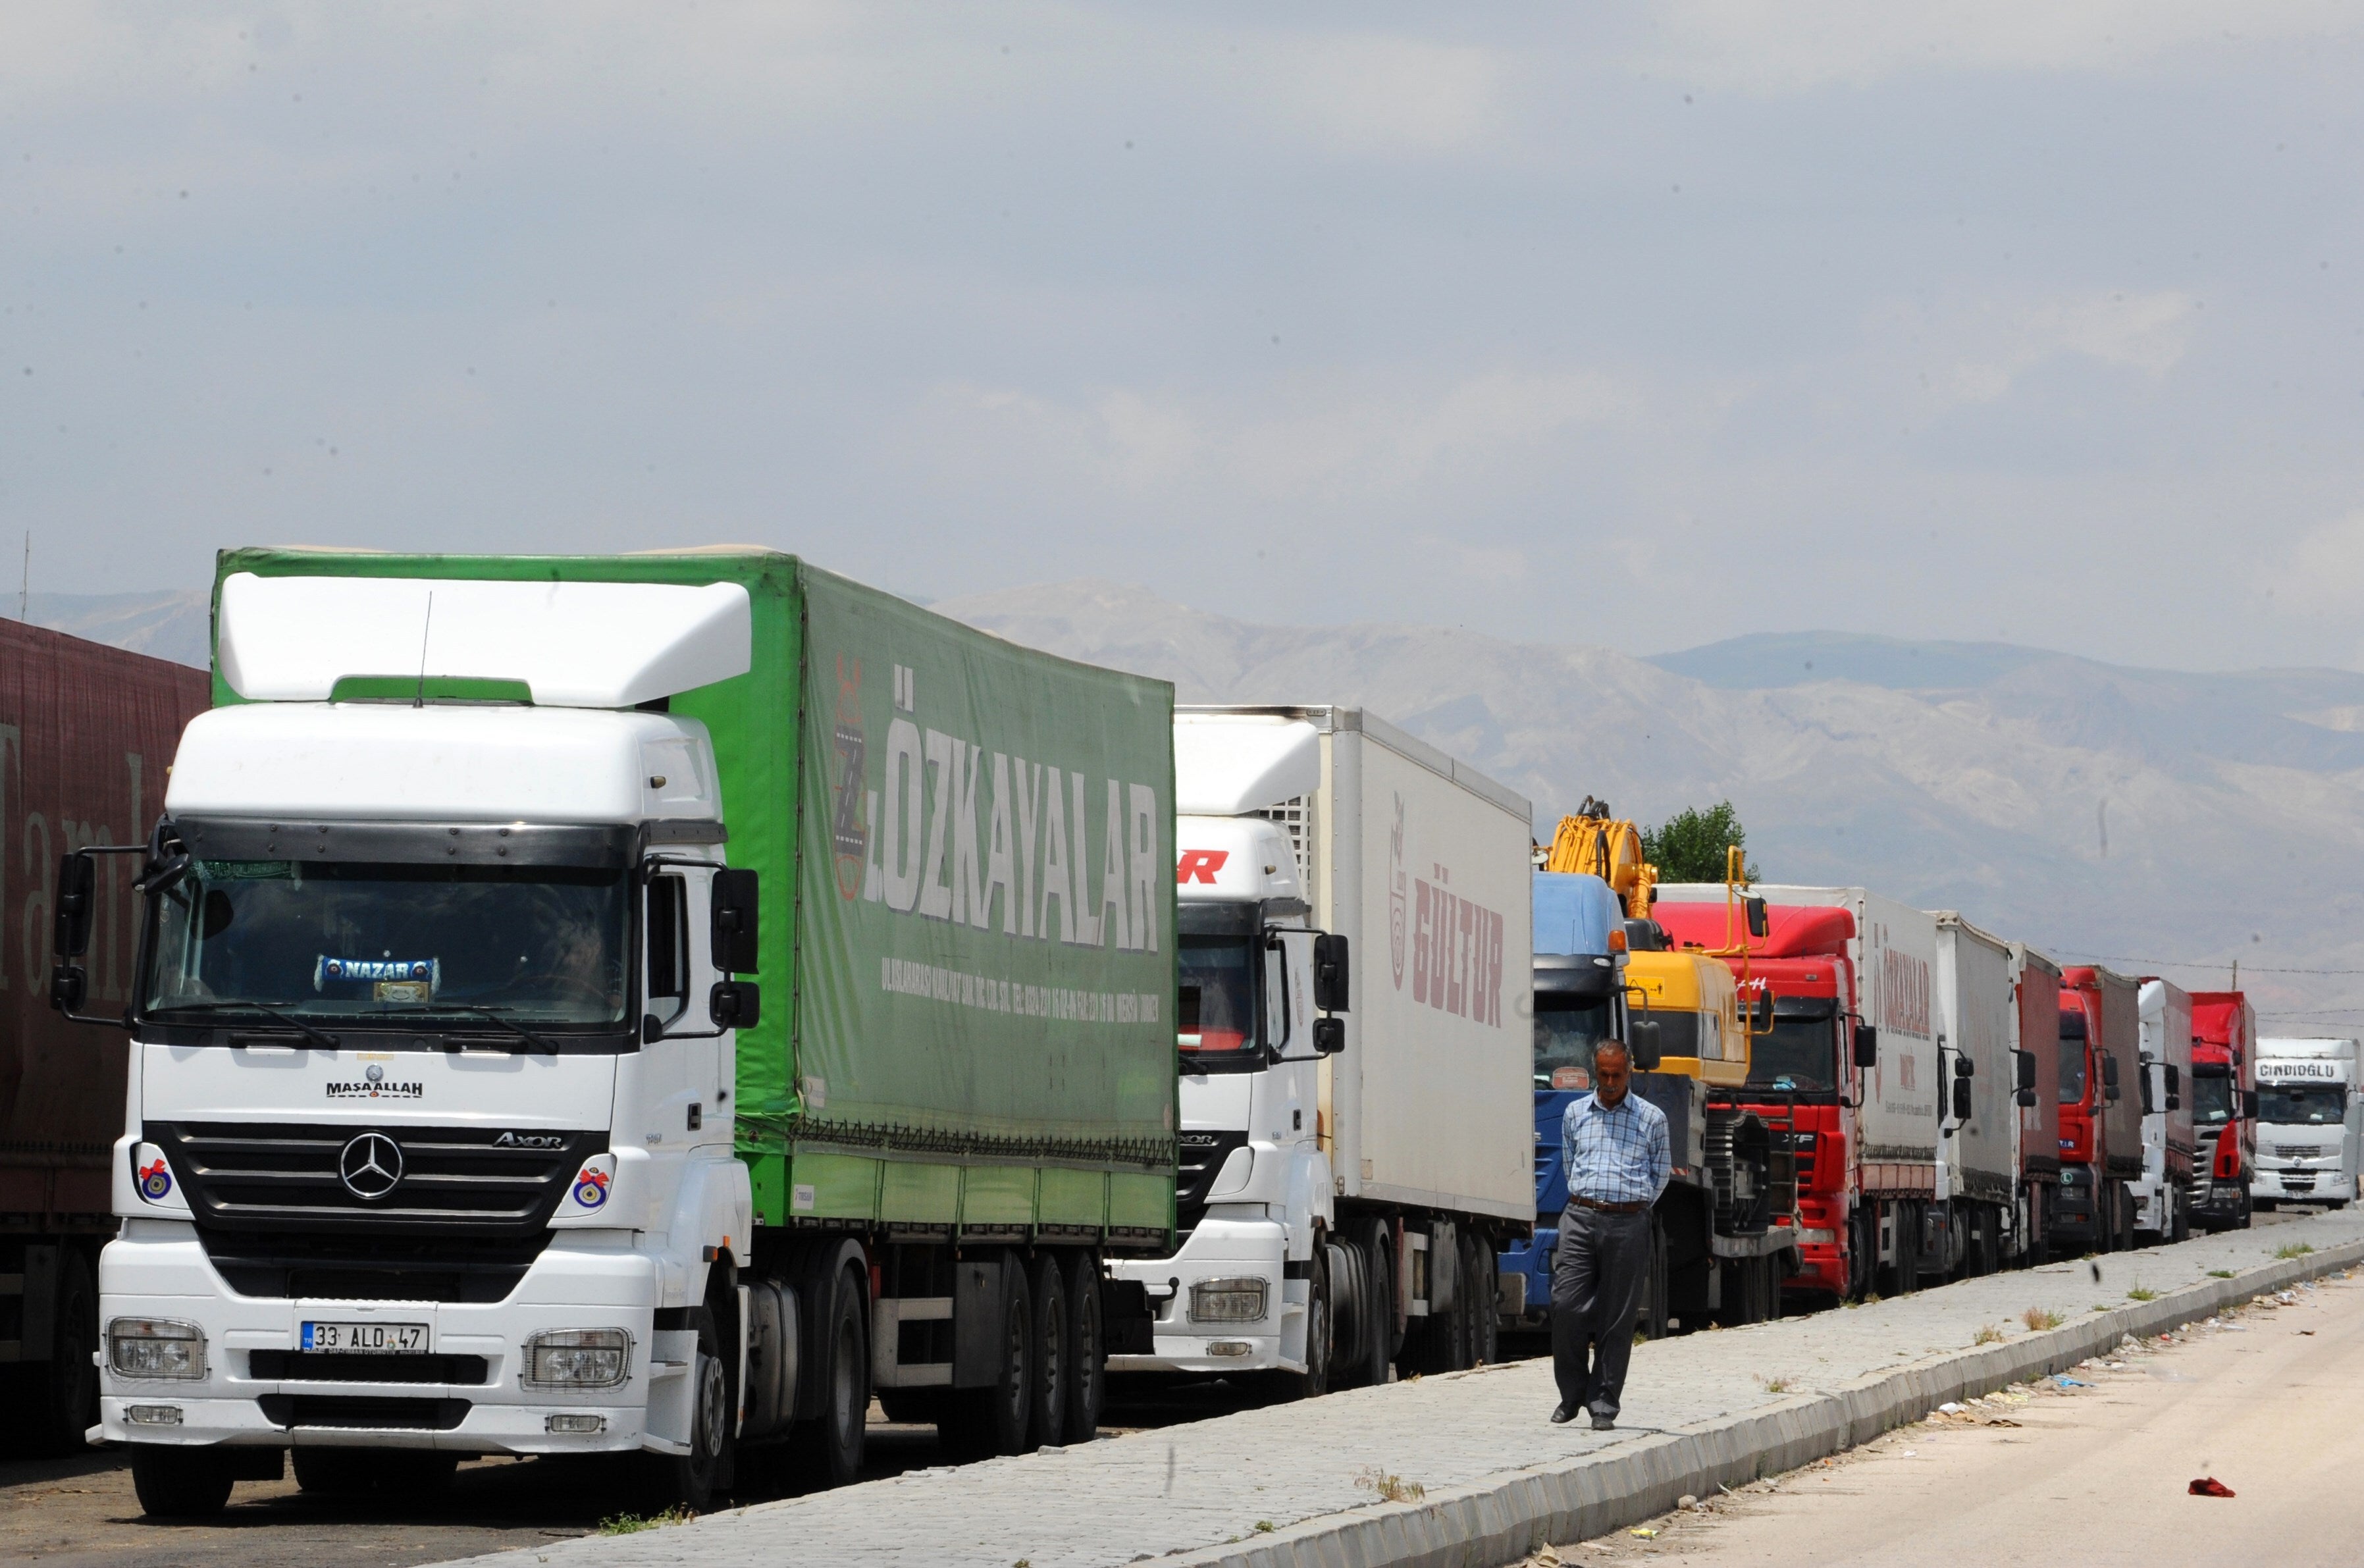 <p>Trucks waiting to cross into Iran from the Turkish side of the border near the Gurbulak border crossing</p>